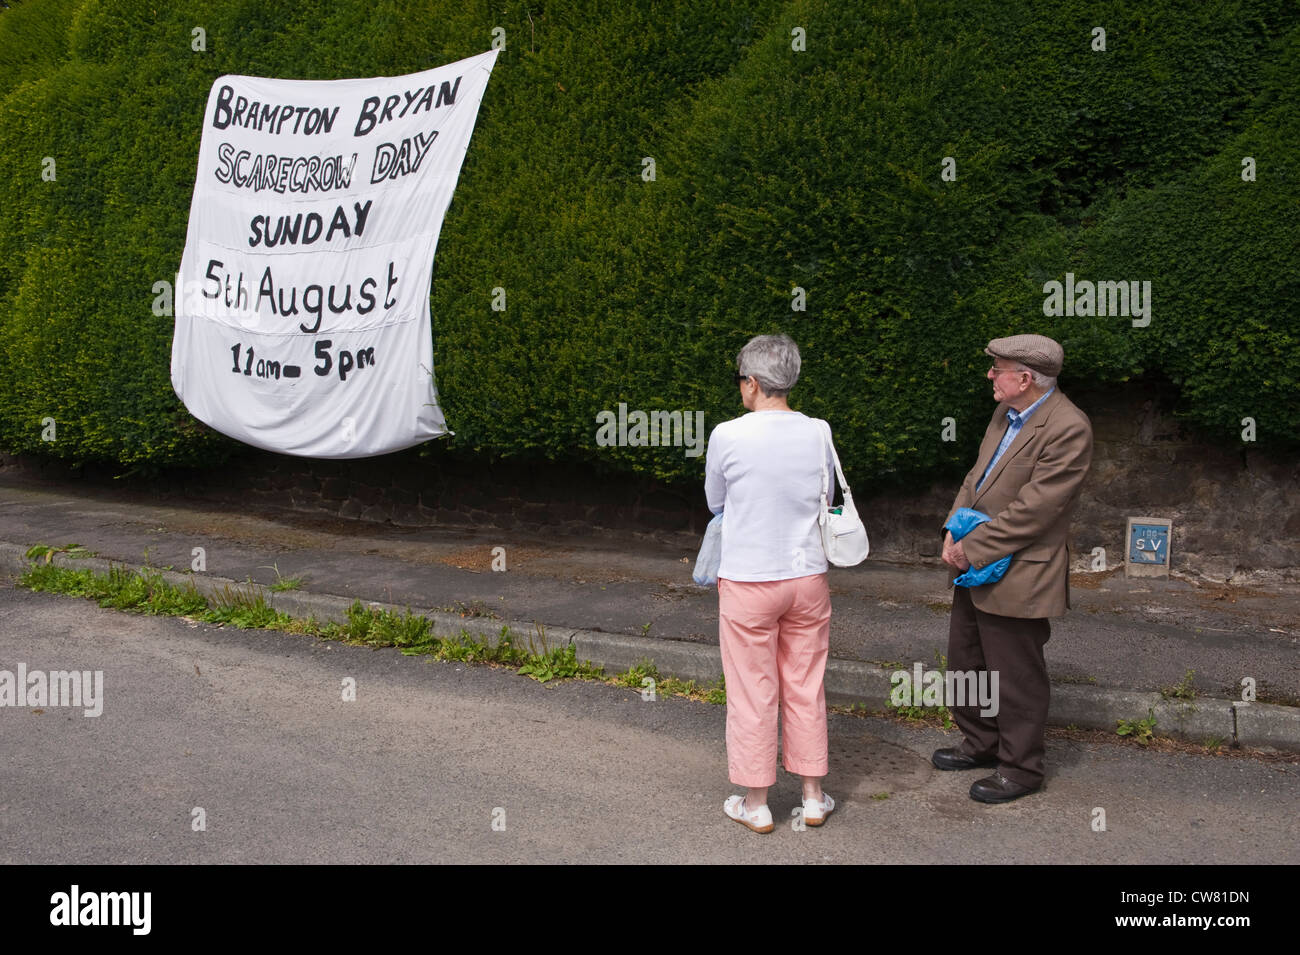 Roadside sign for Scarecrow Day at village fete in village of Brampton Bryan Herefordshire England UK Stock Photo